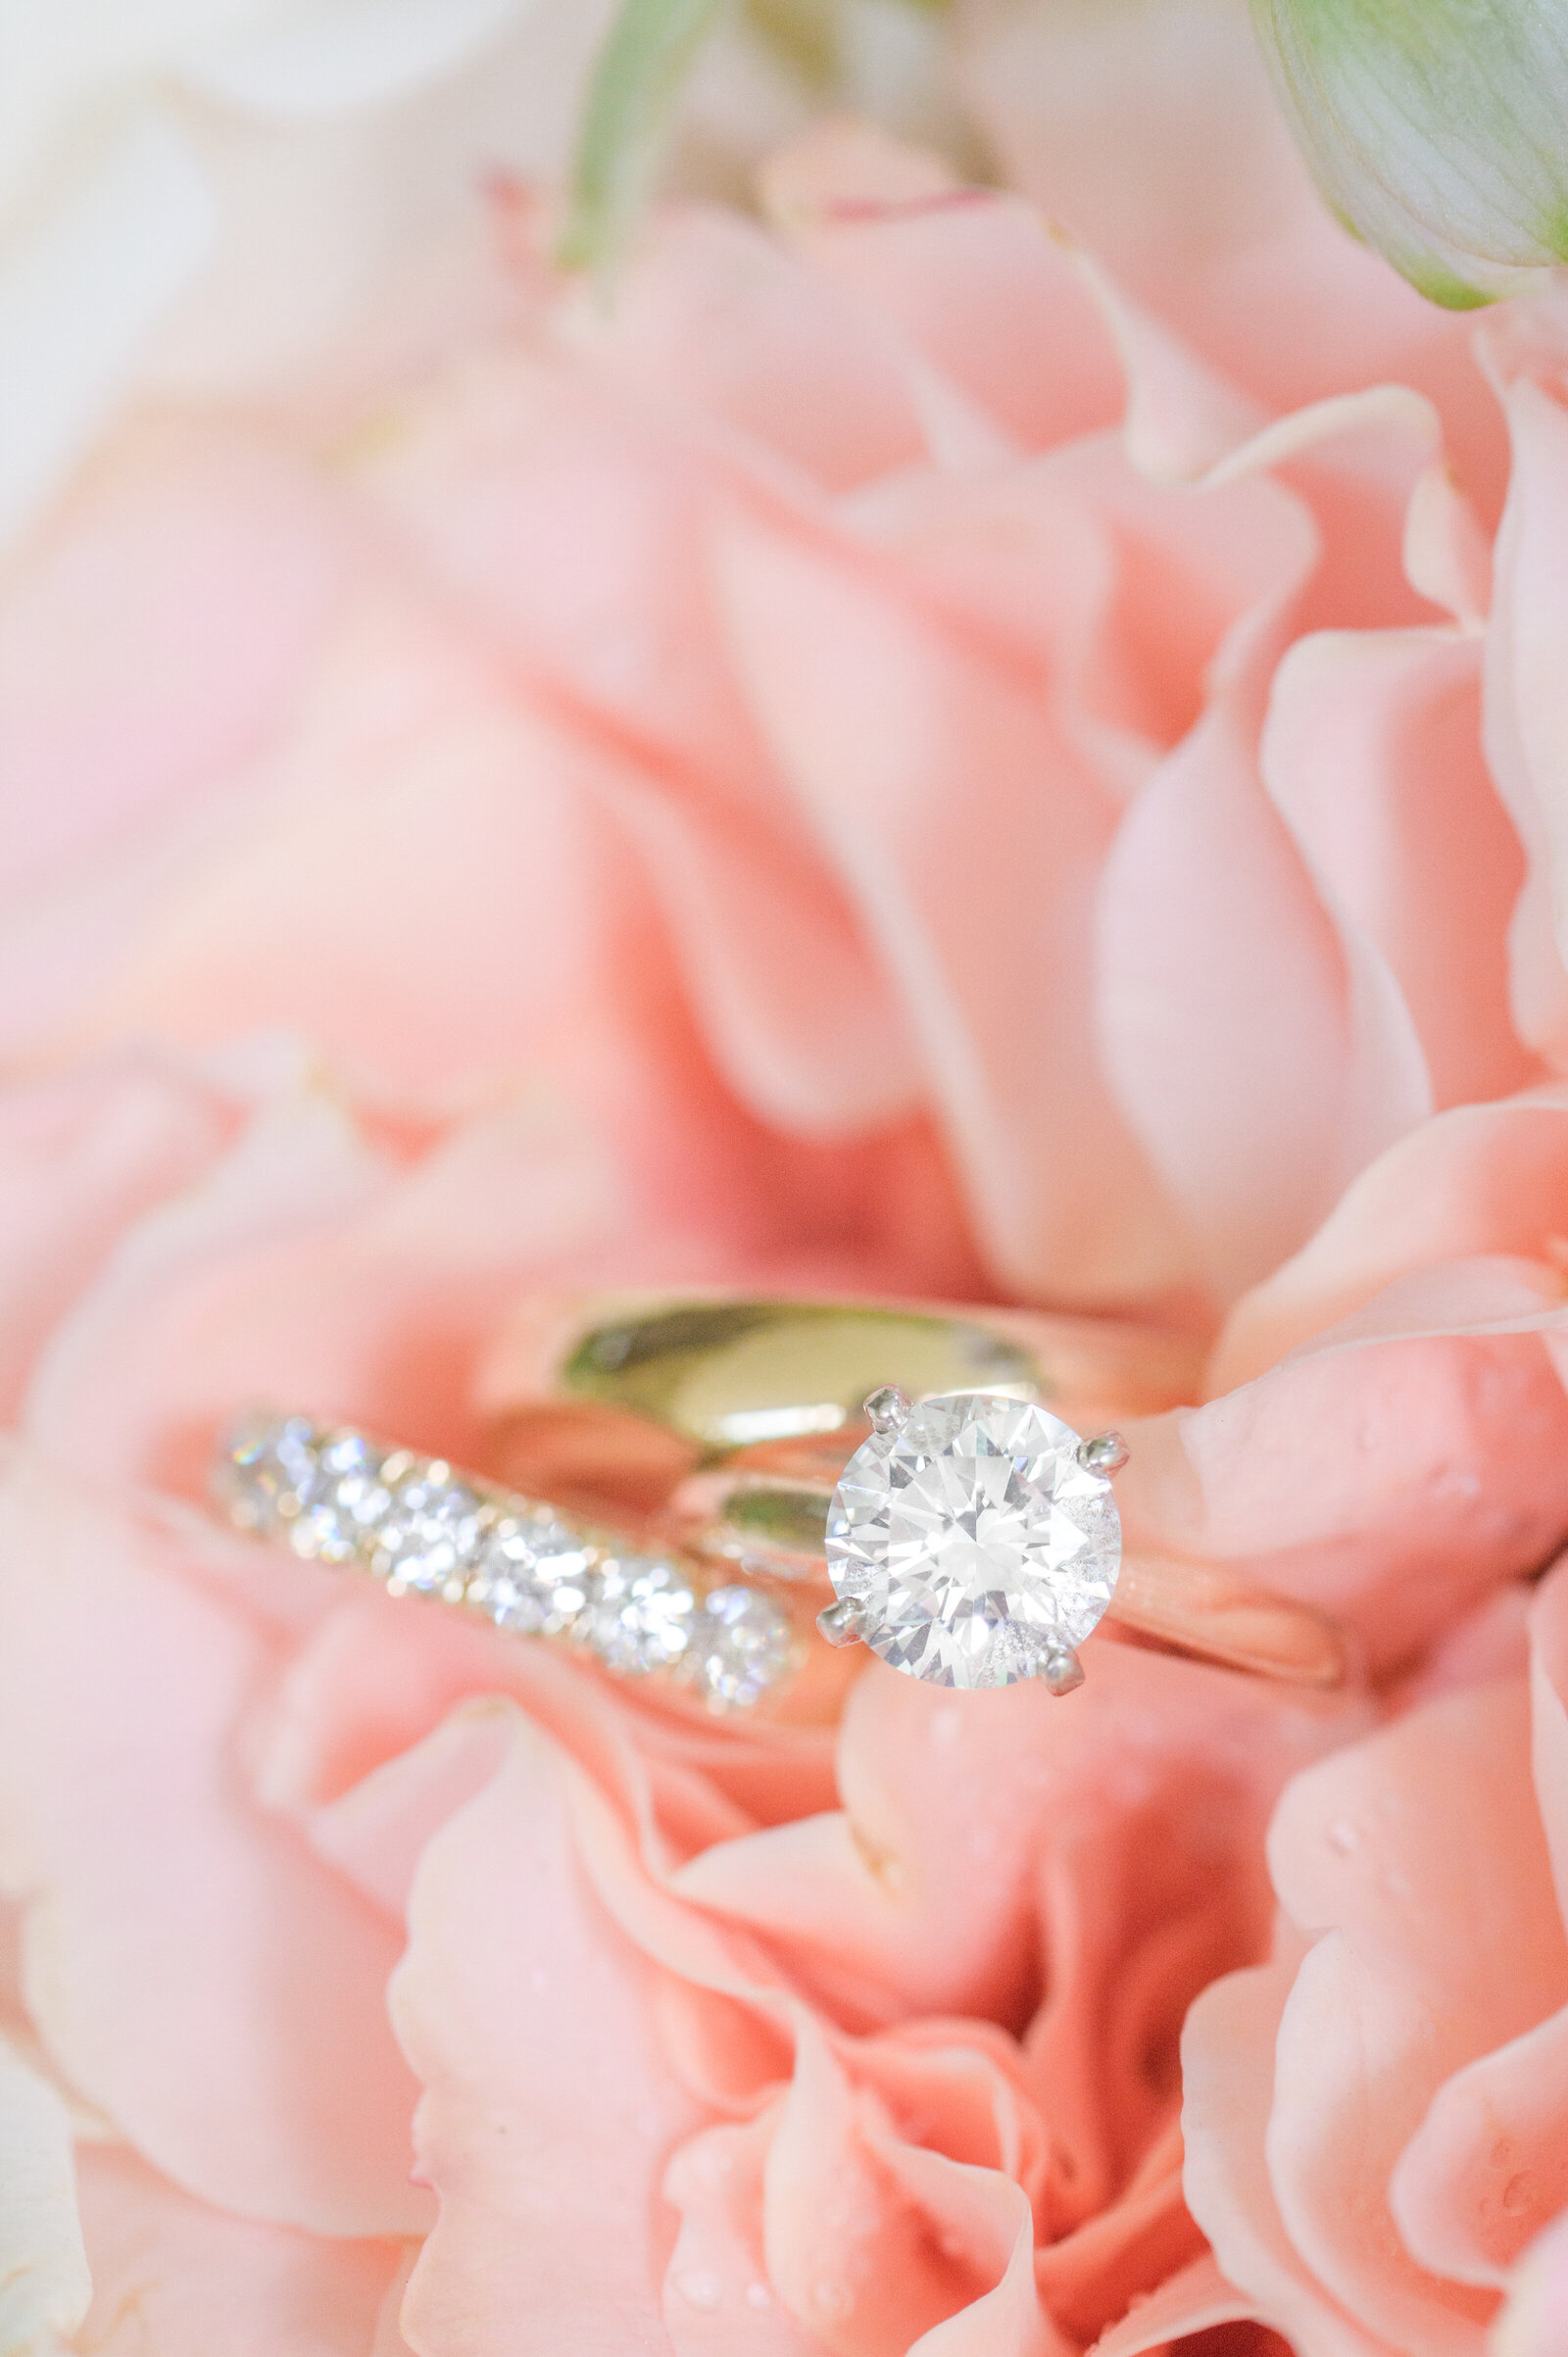 Gold wedding rings sit in coral flower during wedding day photographed by baltimore wedding photographer cait kramer